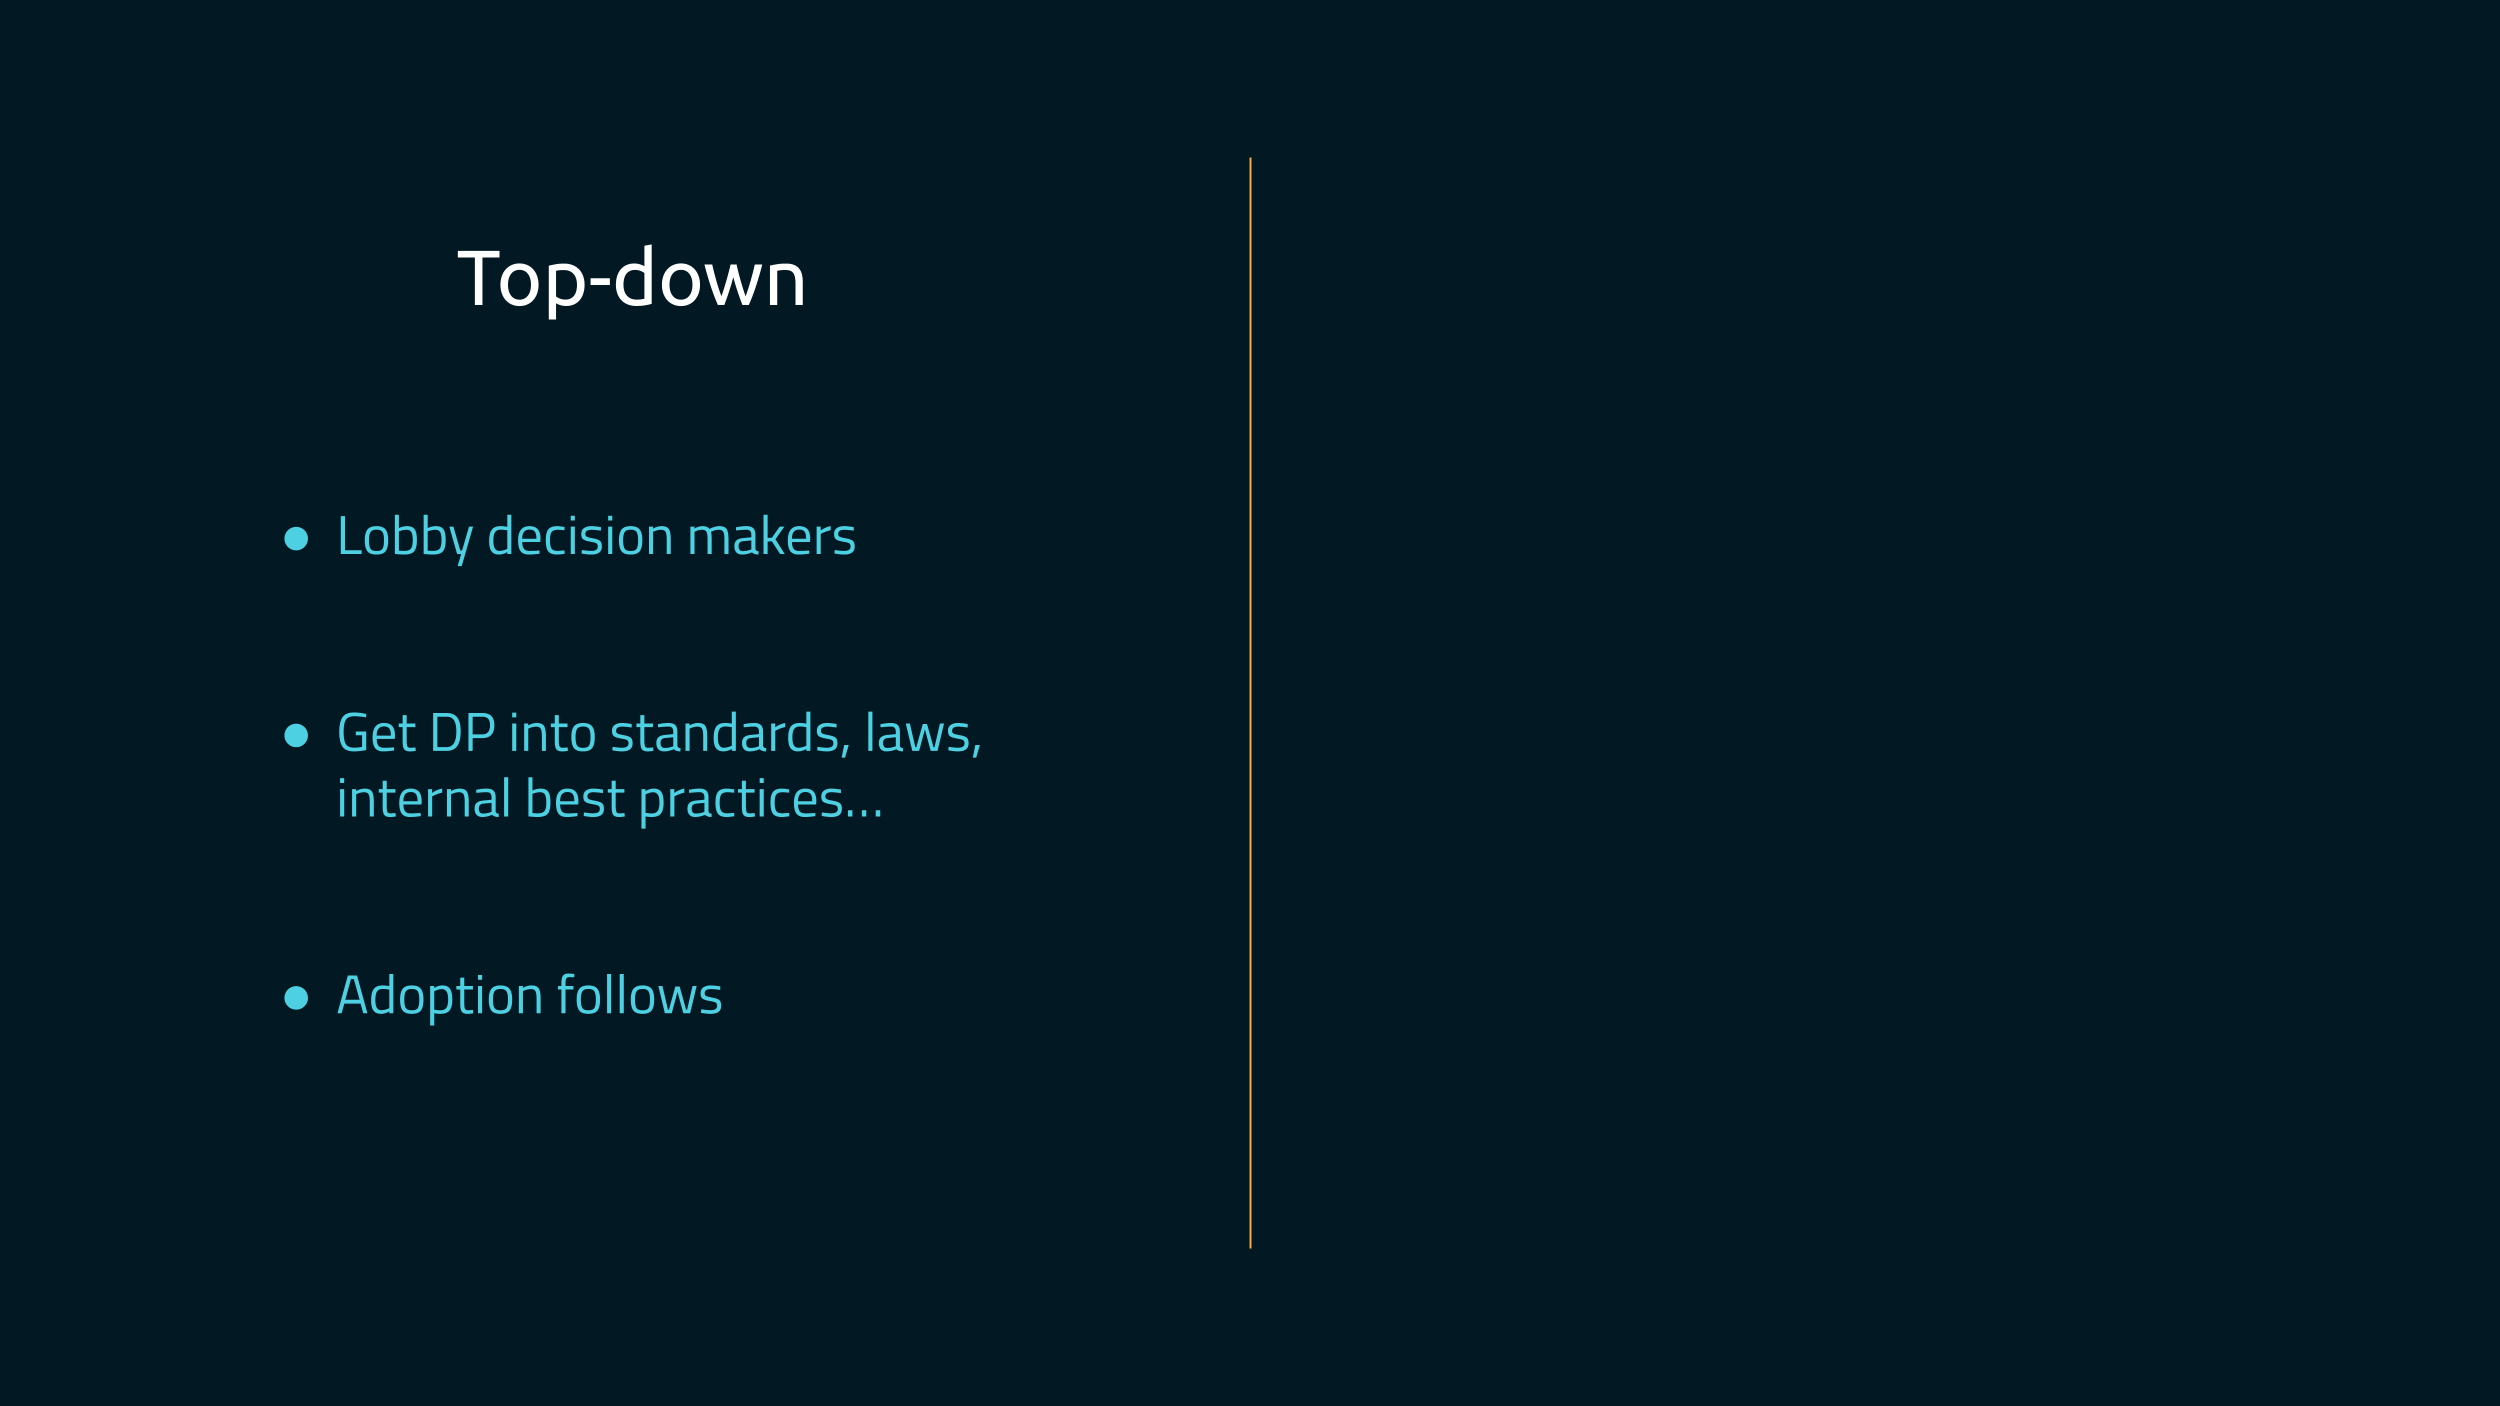 A slide split in two. On the left, the title is "Top-down", and lists three
bullet points: "Lobby decision makers", "Get DP into standards, laws, internal
best practices…", and "Adoption follows". On the right, the slide is
empty.